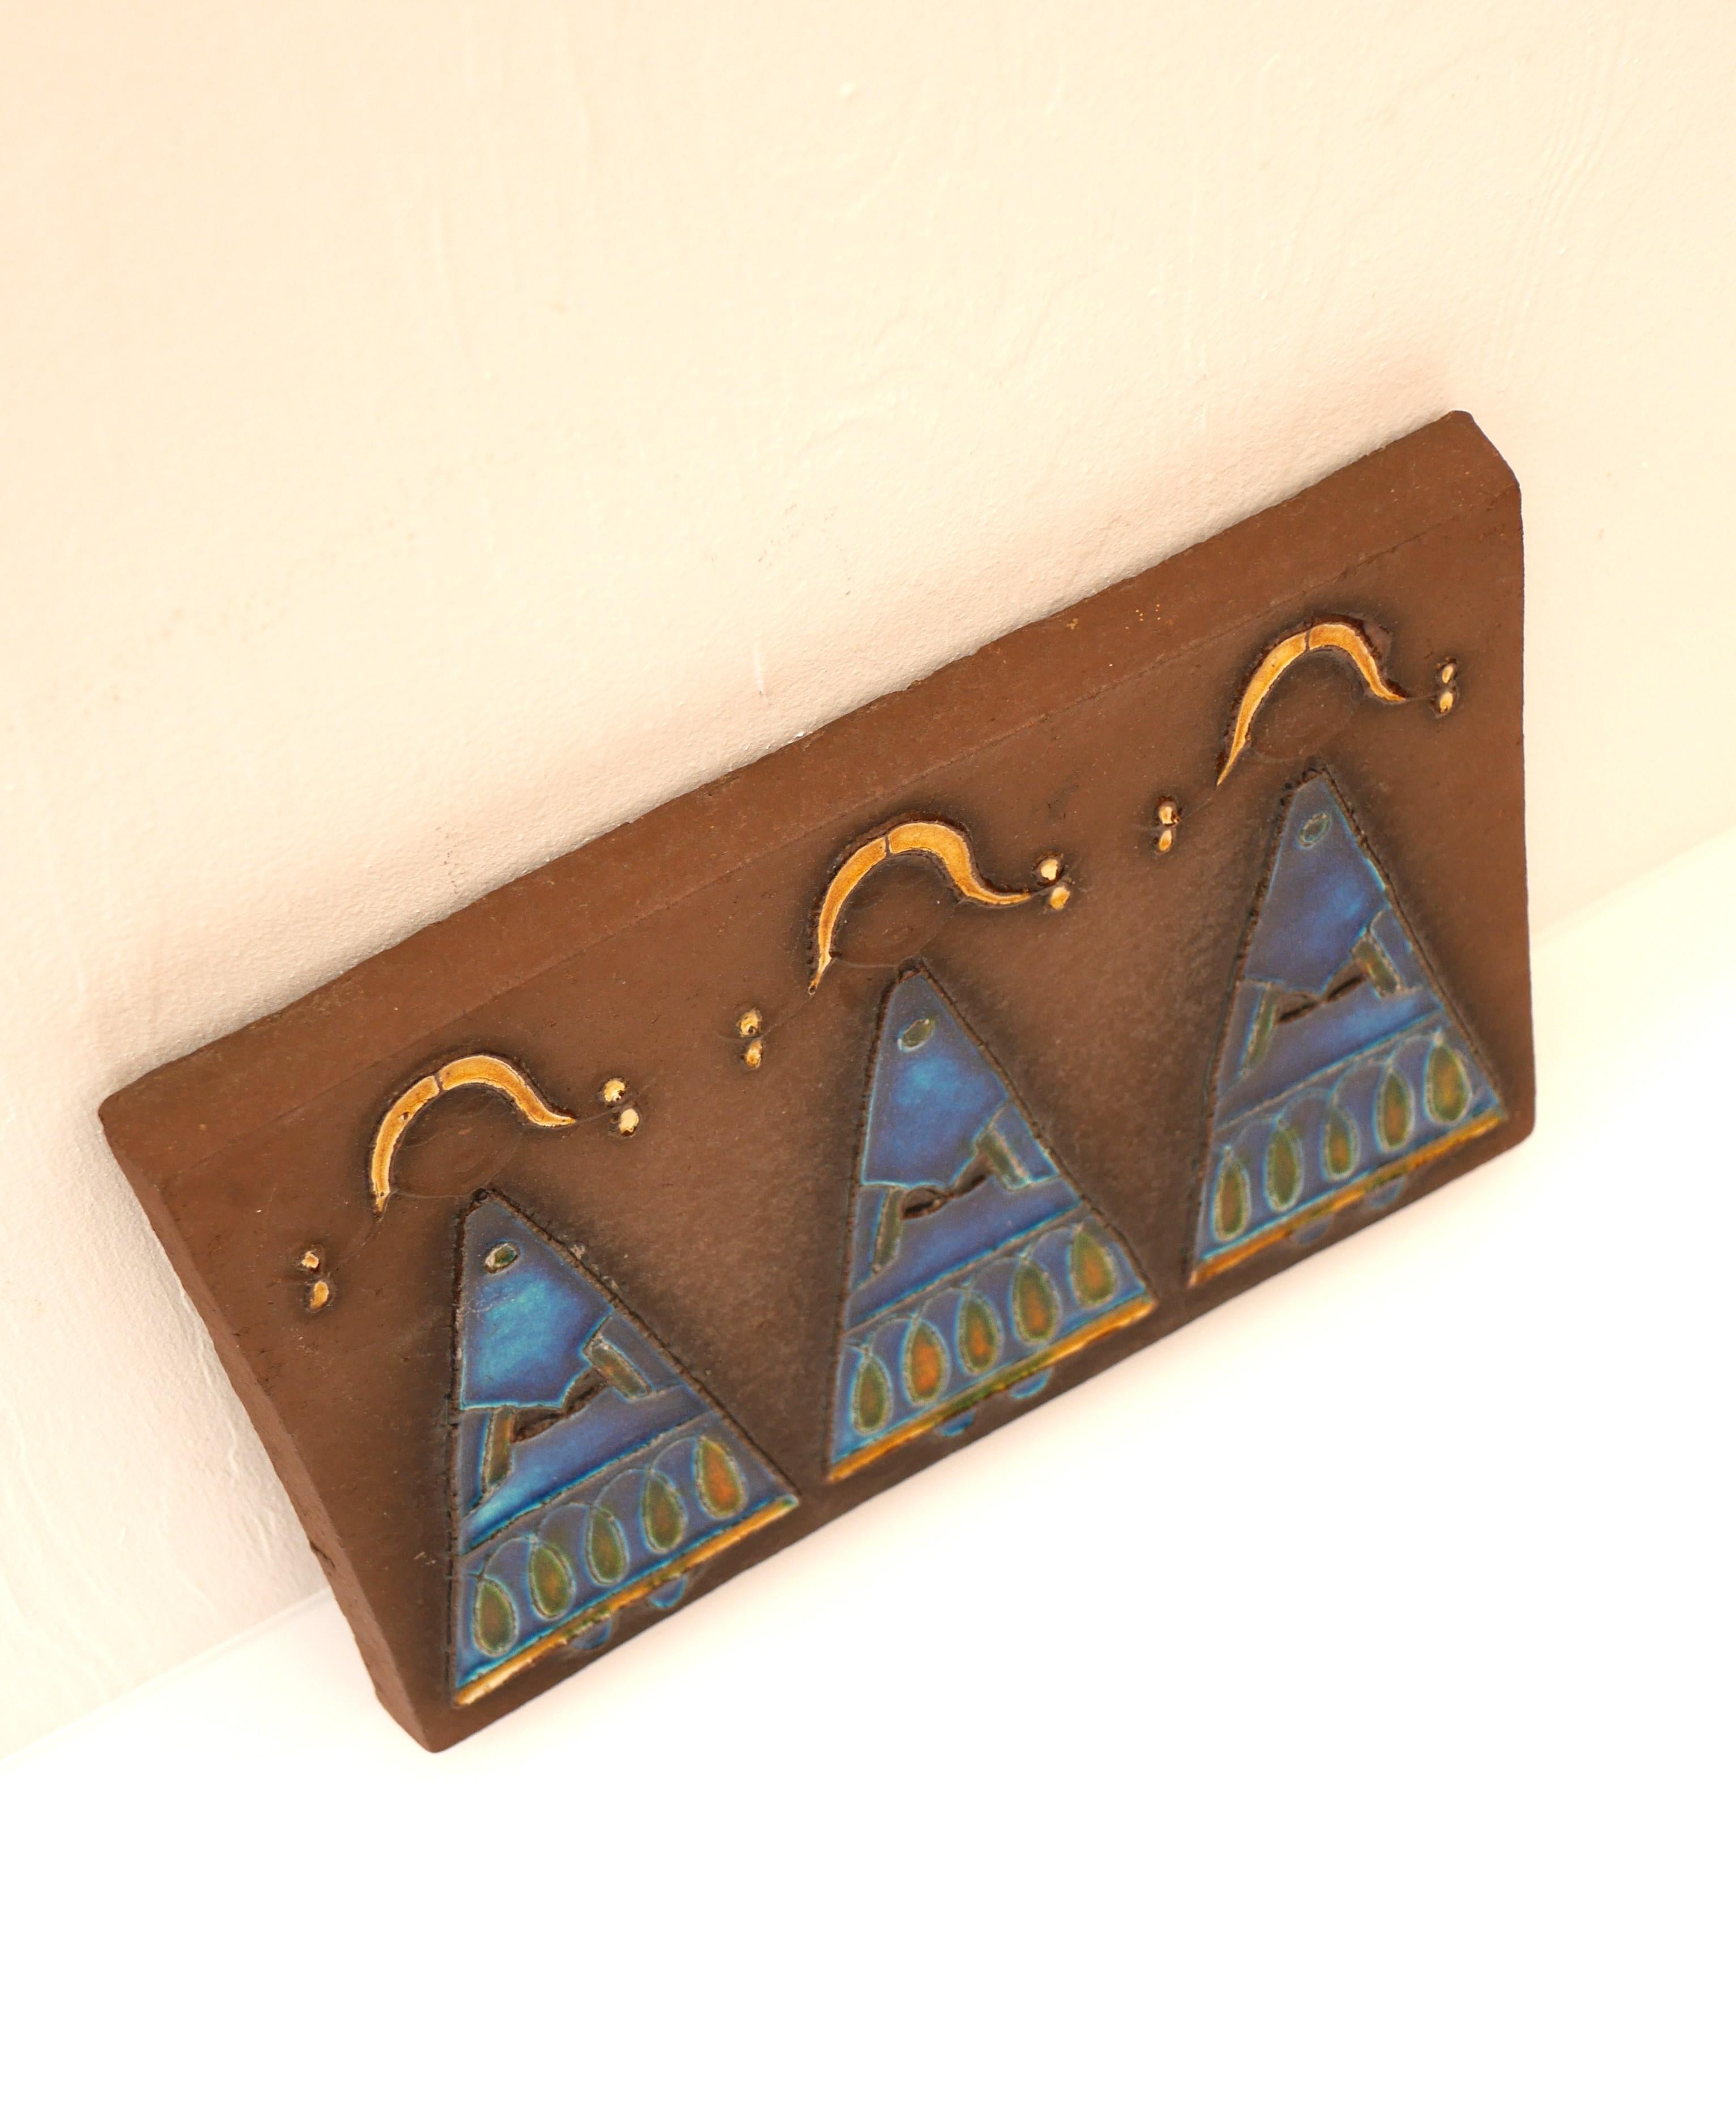 Ceramic Danish Mid-century modern pottery wall decoration by Dietlinde Hein, Knabstrup For Sale